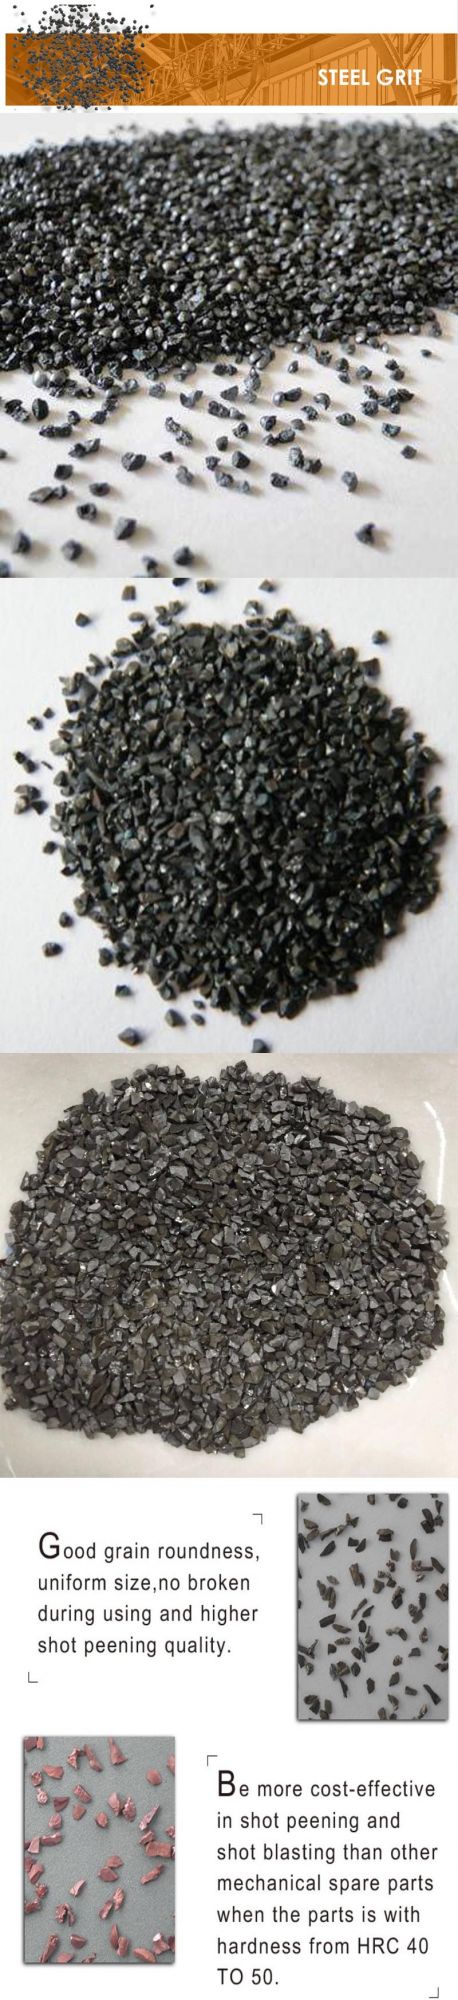 Best Selling Cast Steel Grit G80 for Surface Treatment